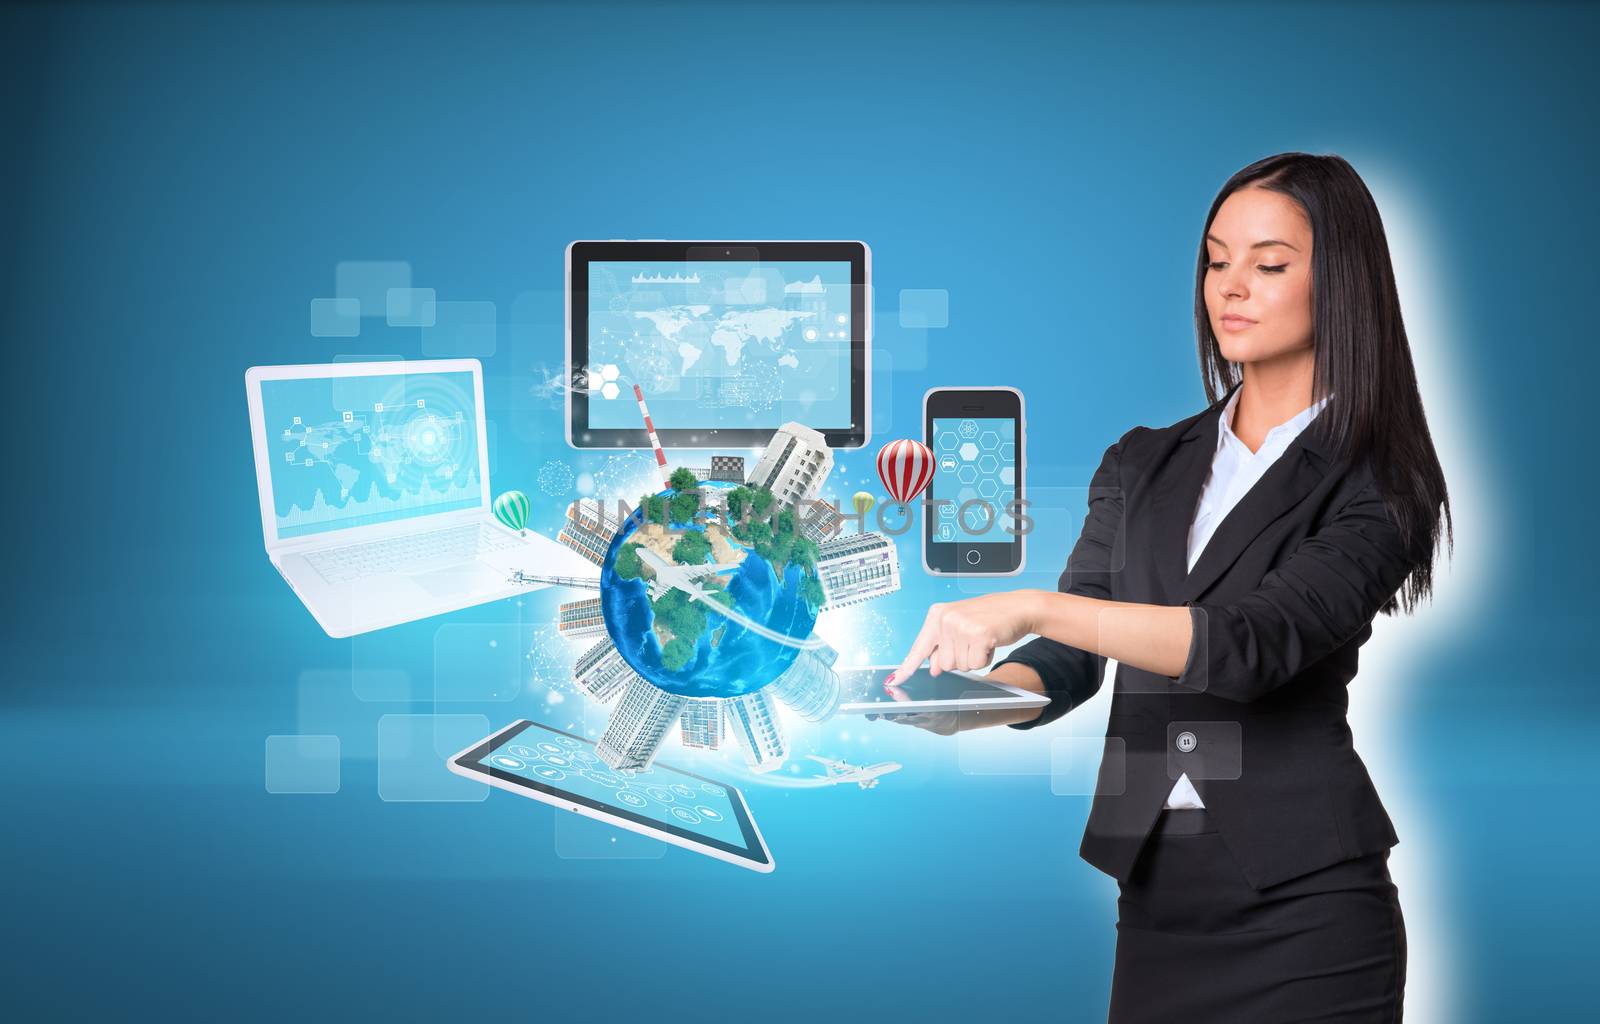 Beautiful businesswomen in suit using digital tablet. Earth with buildings and laptop, tablets and smartphone. Element of this image furnished by NASA